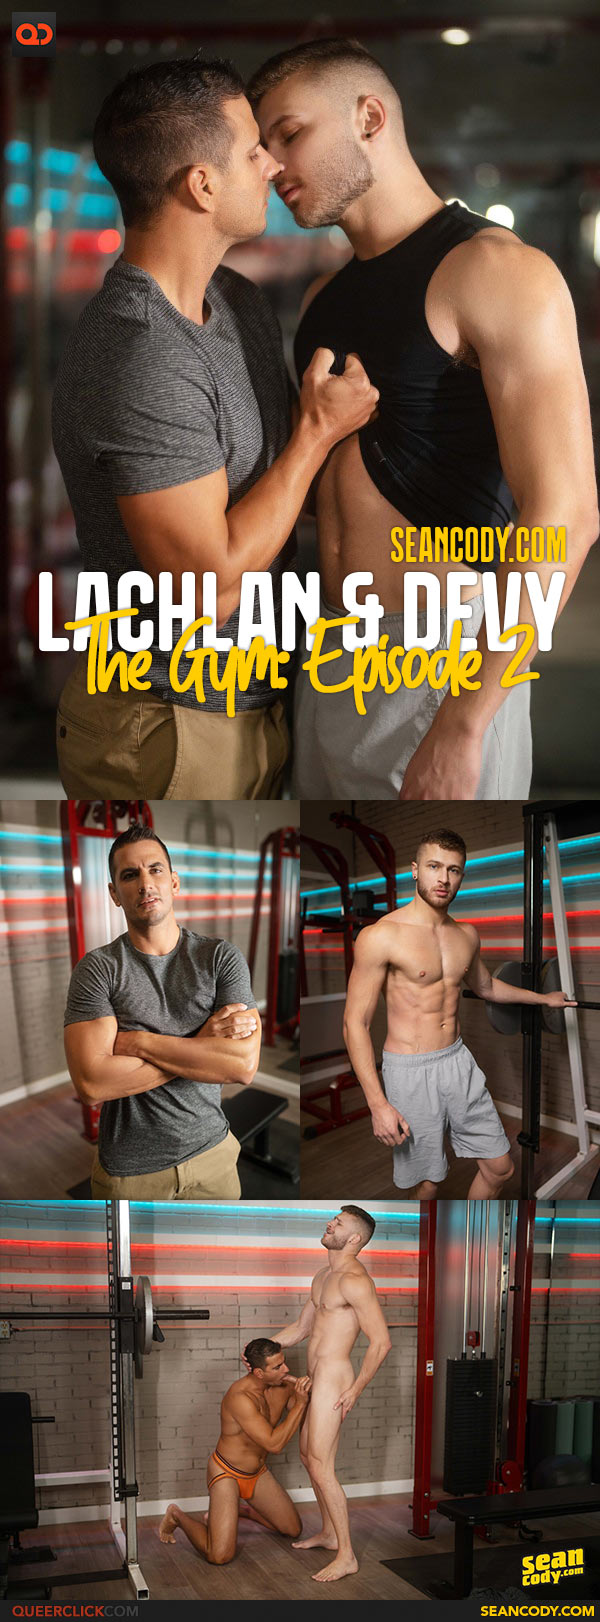 Sean Cody: Lachlan and Devy Flip Fuck - The Gym Part 2